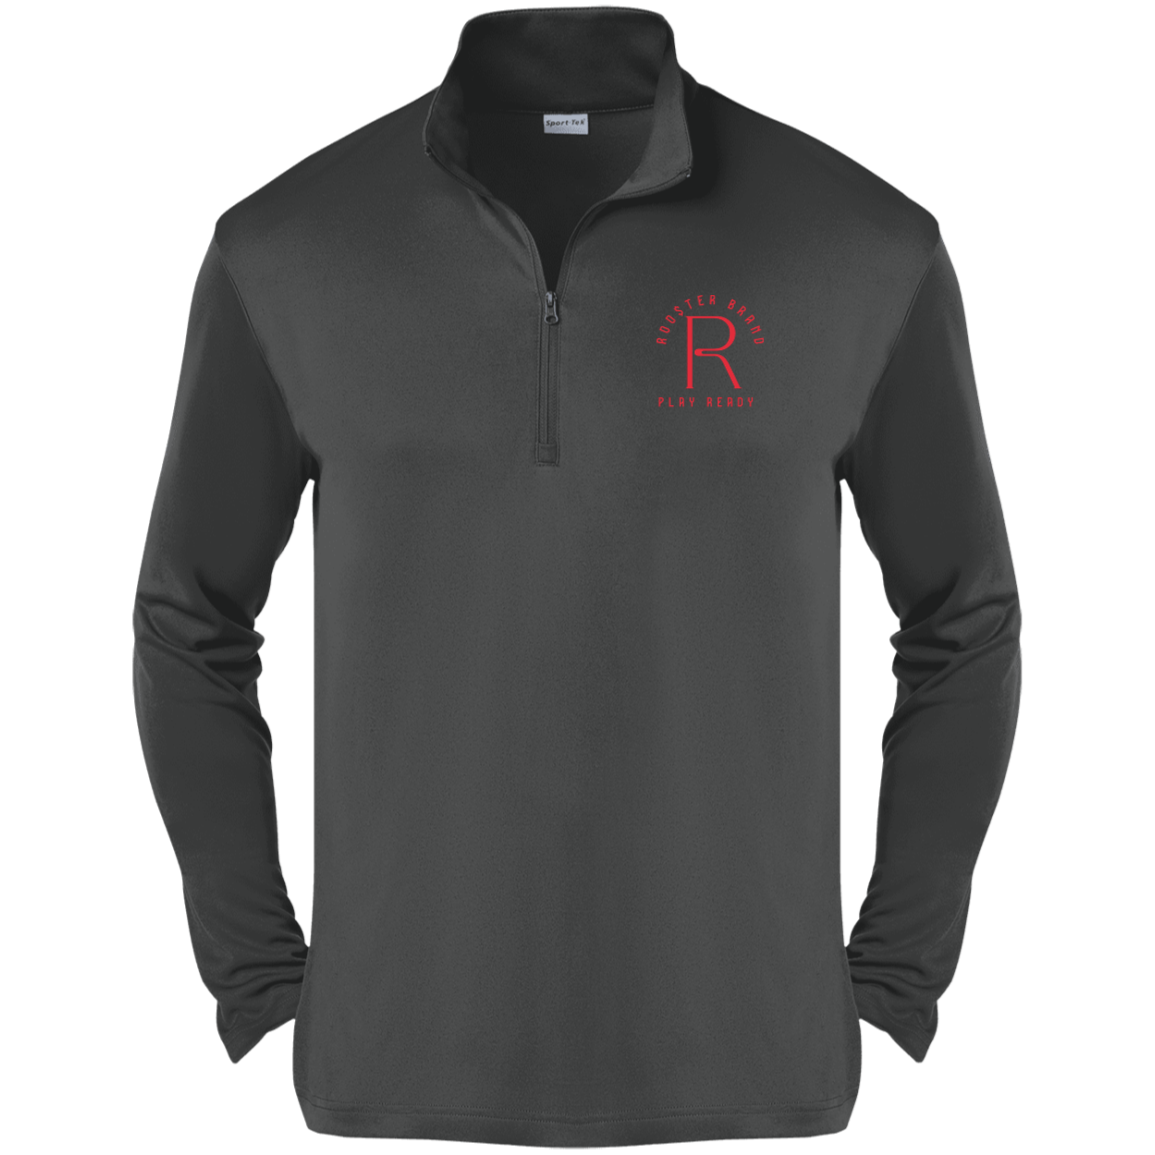 Roo$ter Brand !/4 Zip for Cold Weather